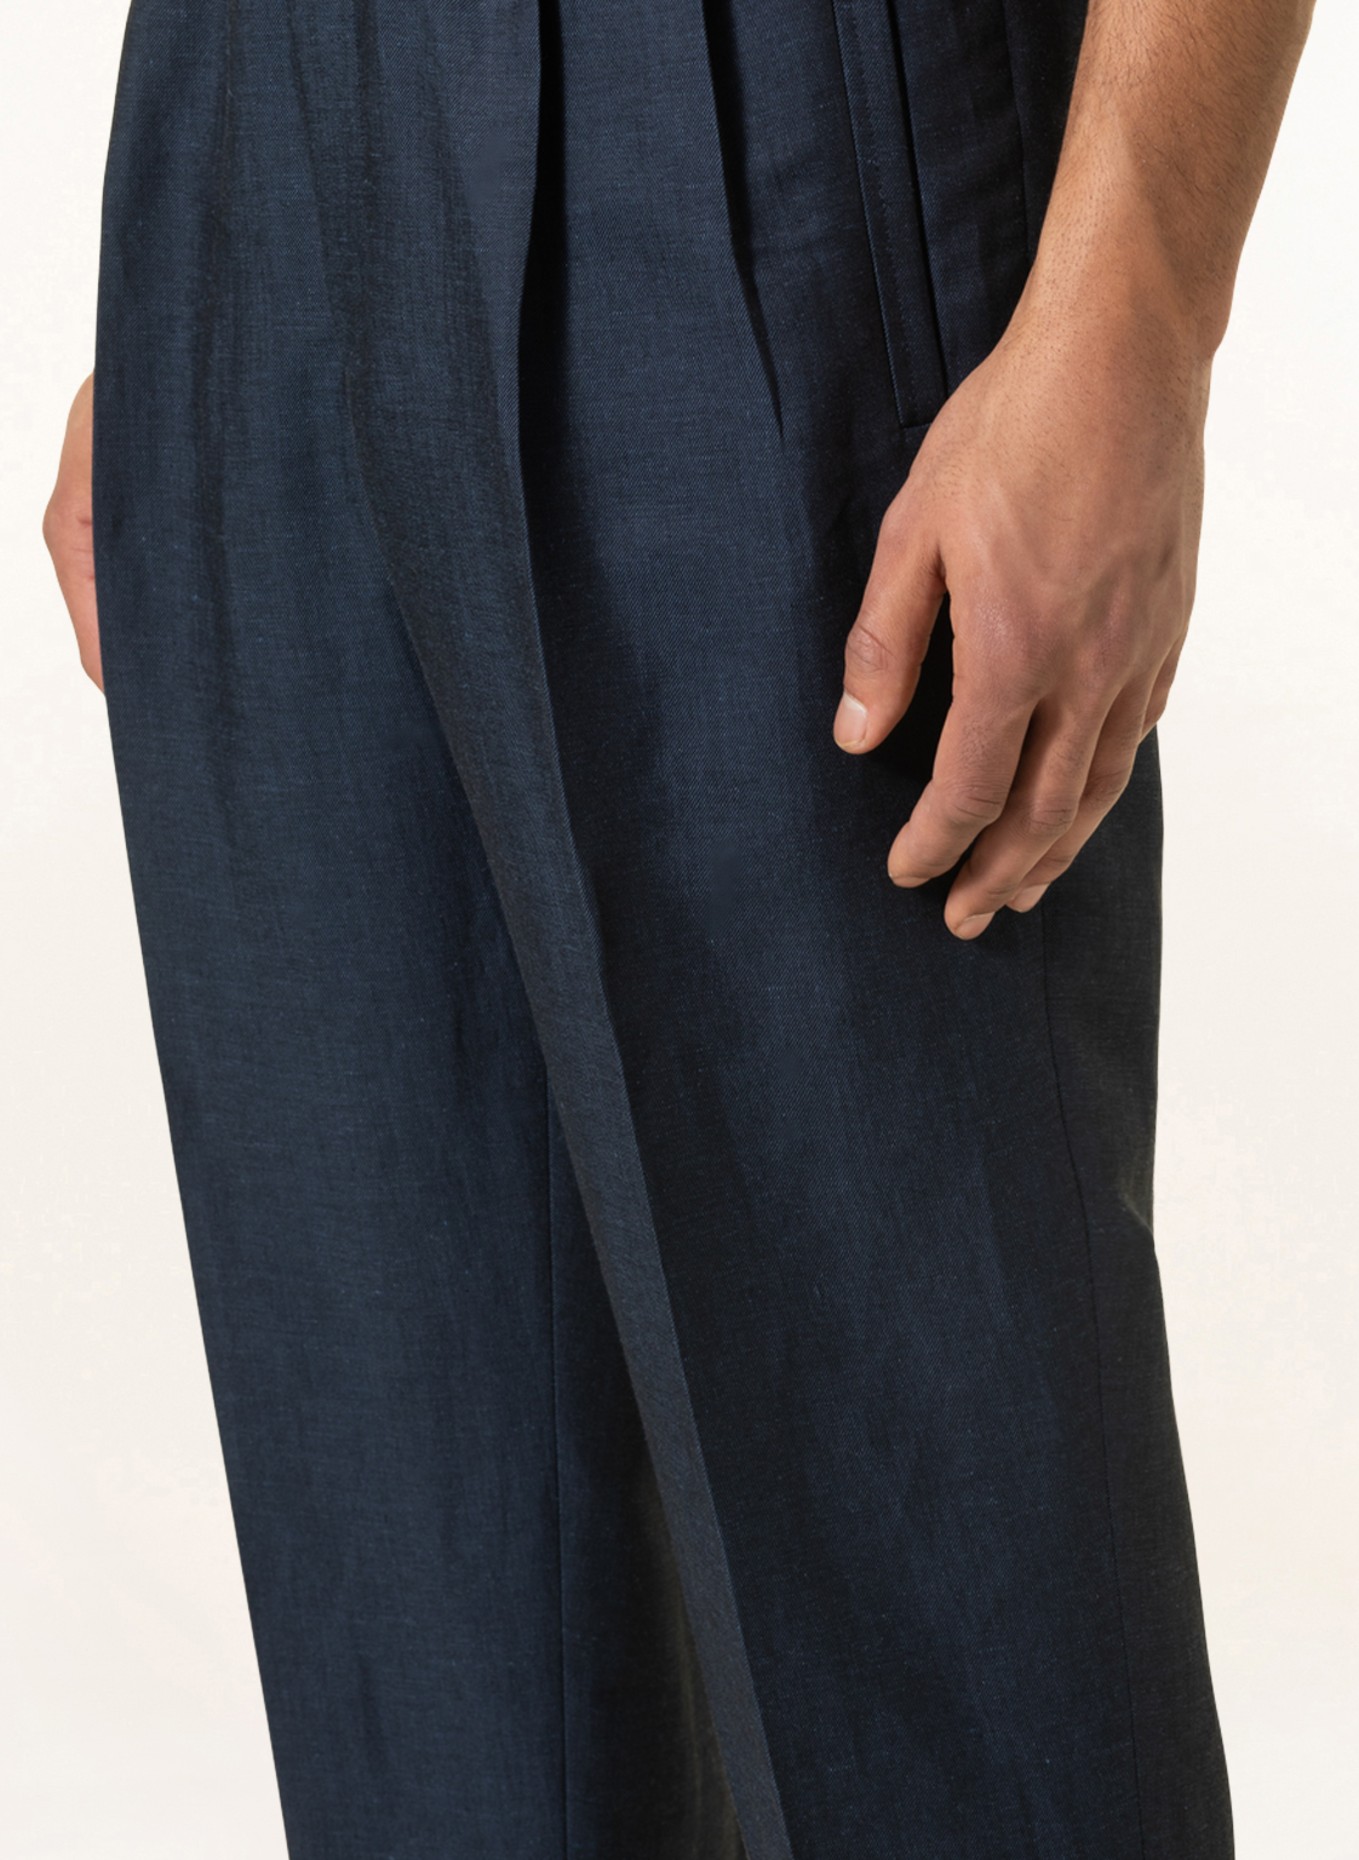 ZEGNA Pants in jogger style with linen, Color: DARK BLUE (Image 5)